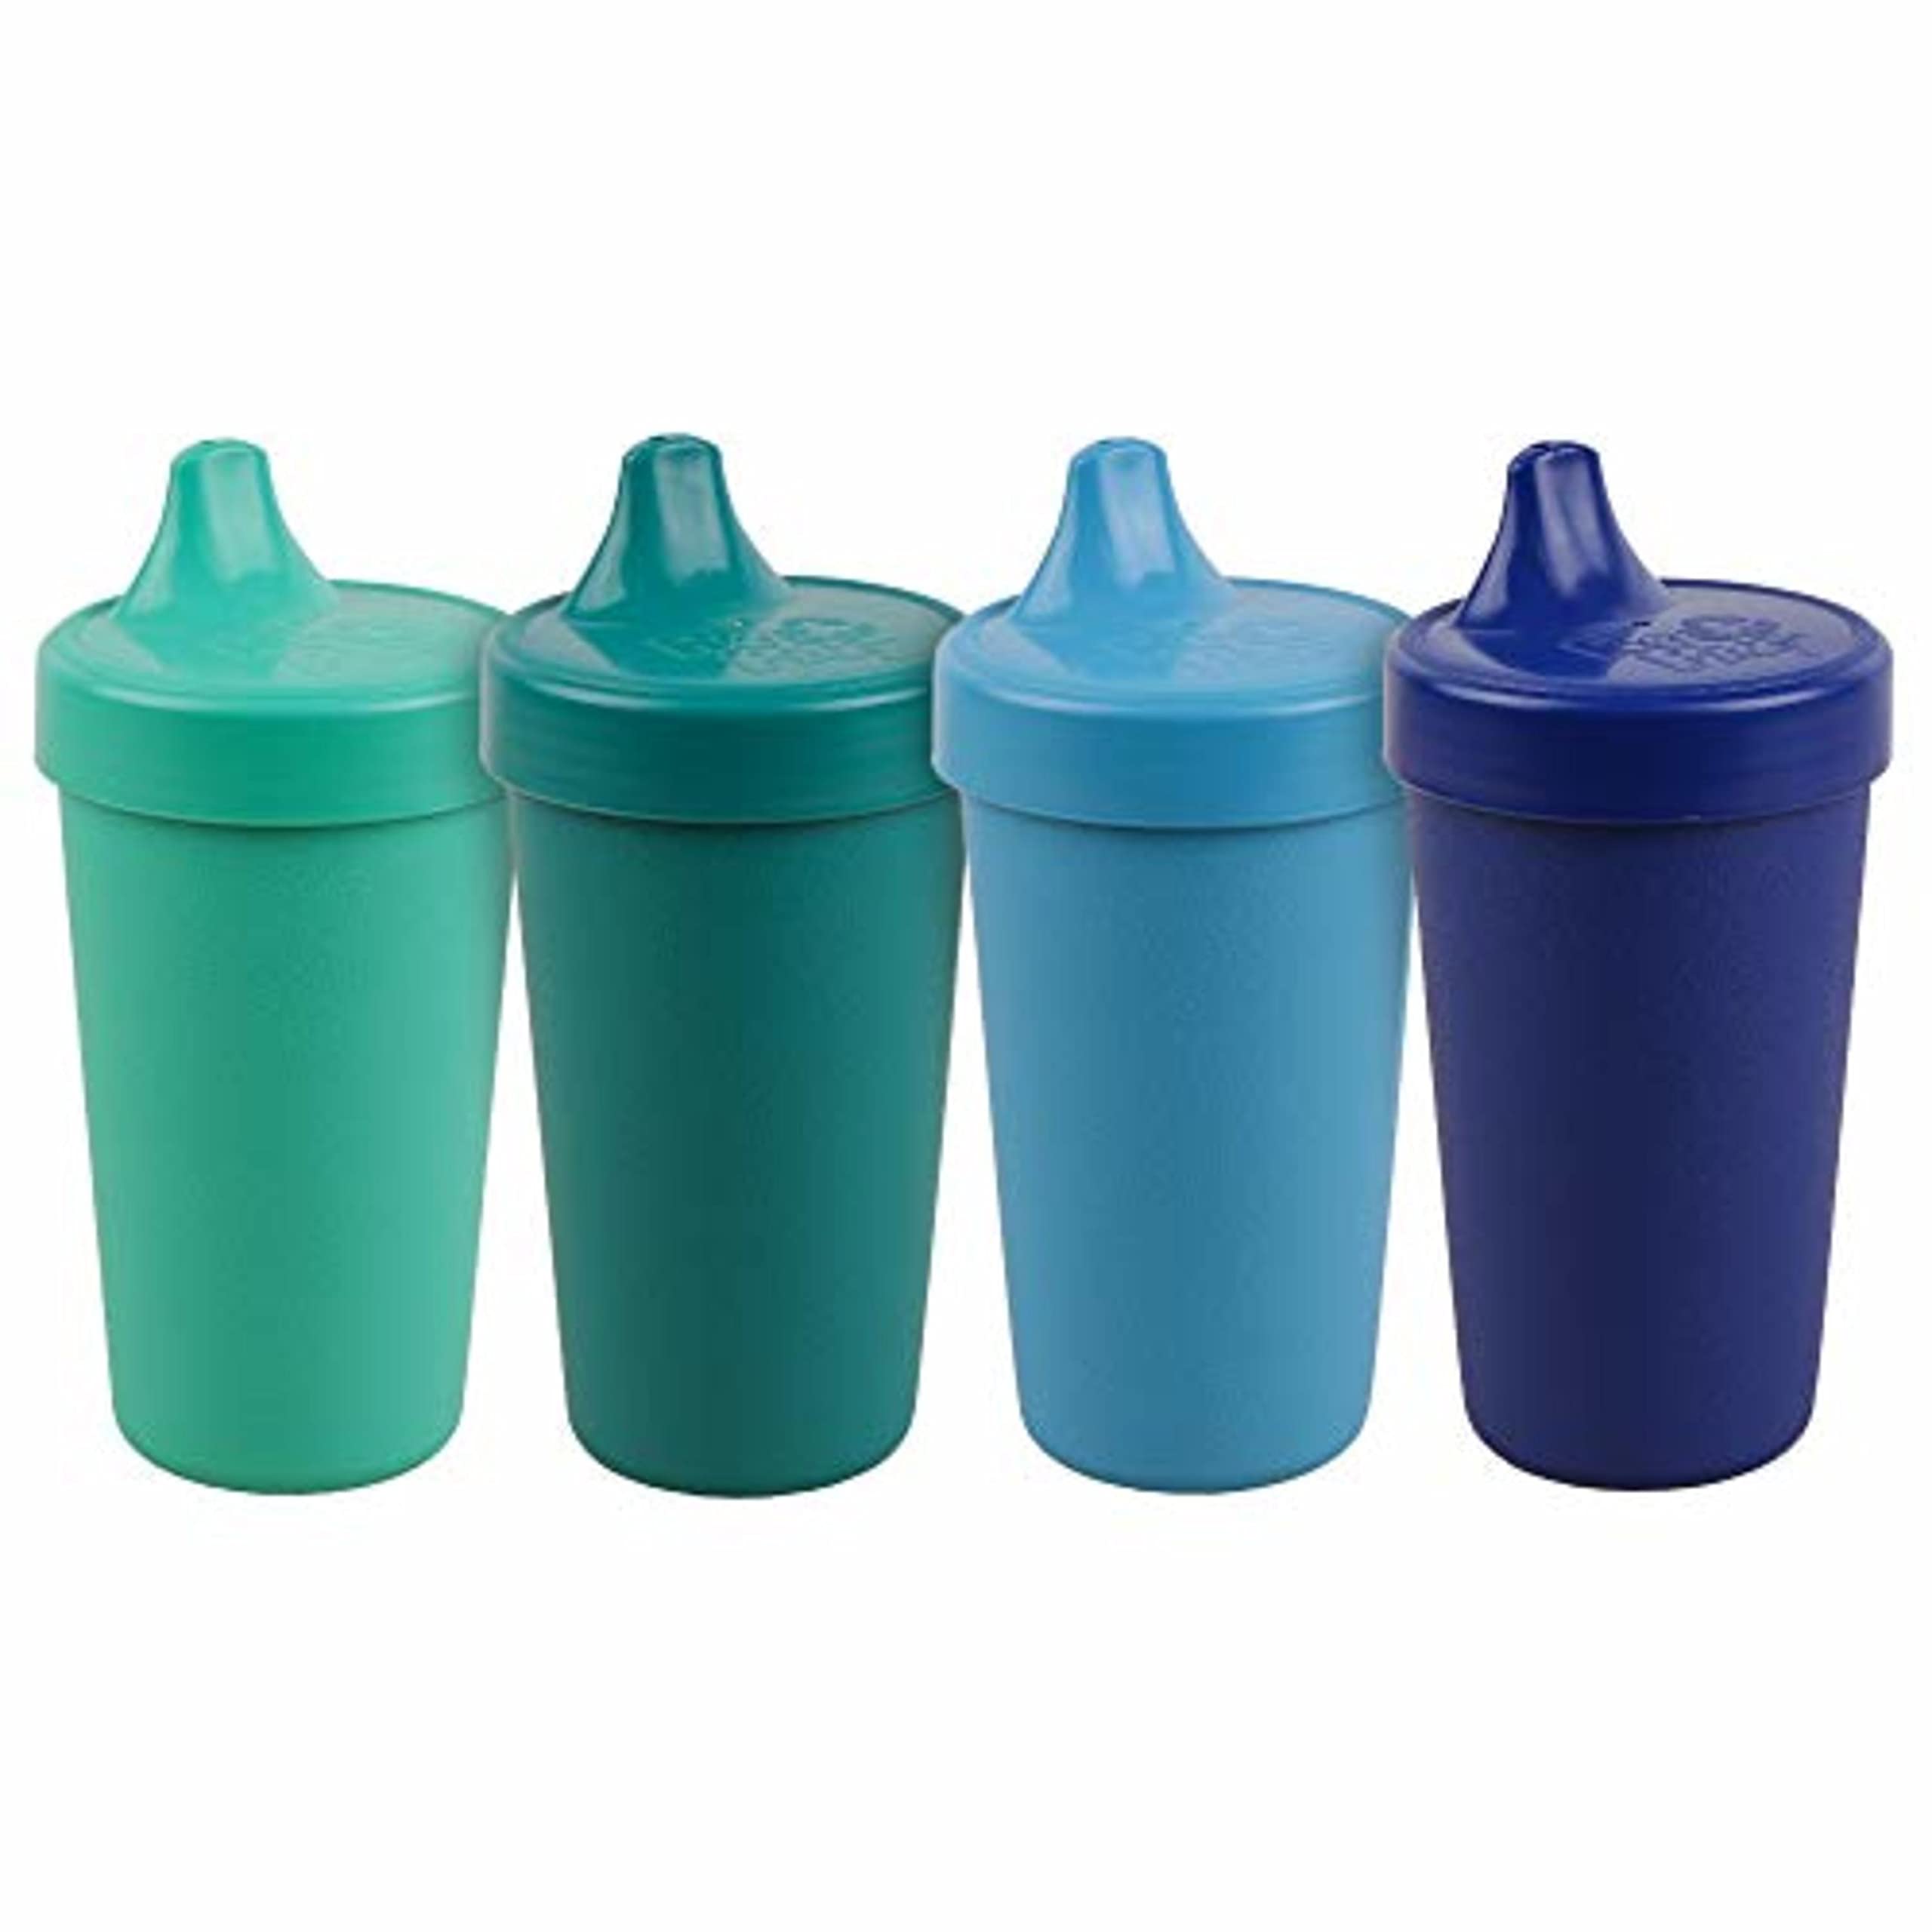 Re Play Made in USA 10 Oz. Sippy Cups for Toddlers, Pack of 4 - Reusable Spill Proof Cups for Kids, Dishwasher/Microwave Safe - Hard Spout Sippy Cups for Toddlers 3.13